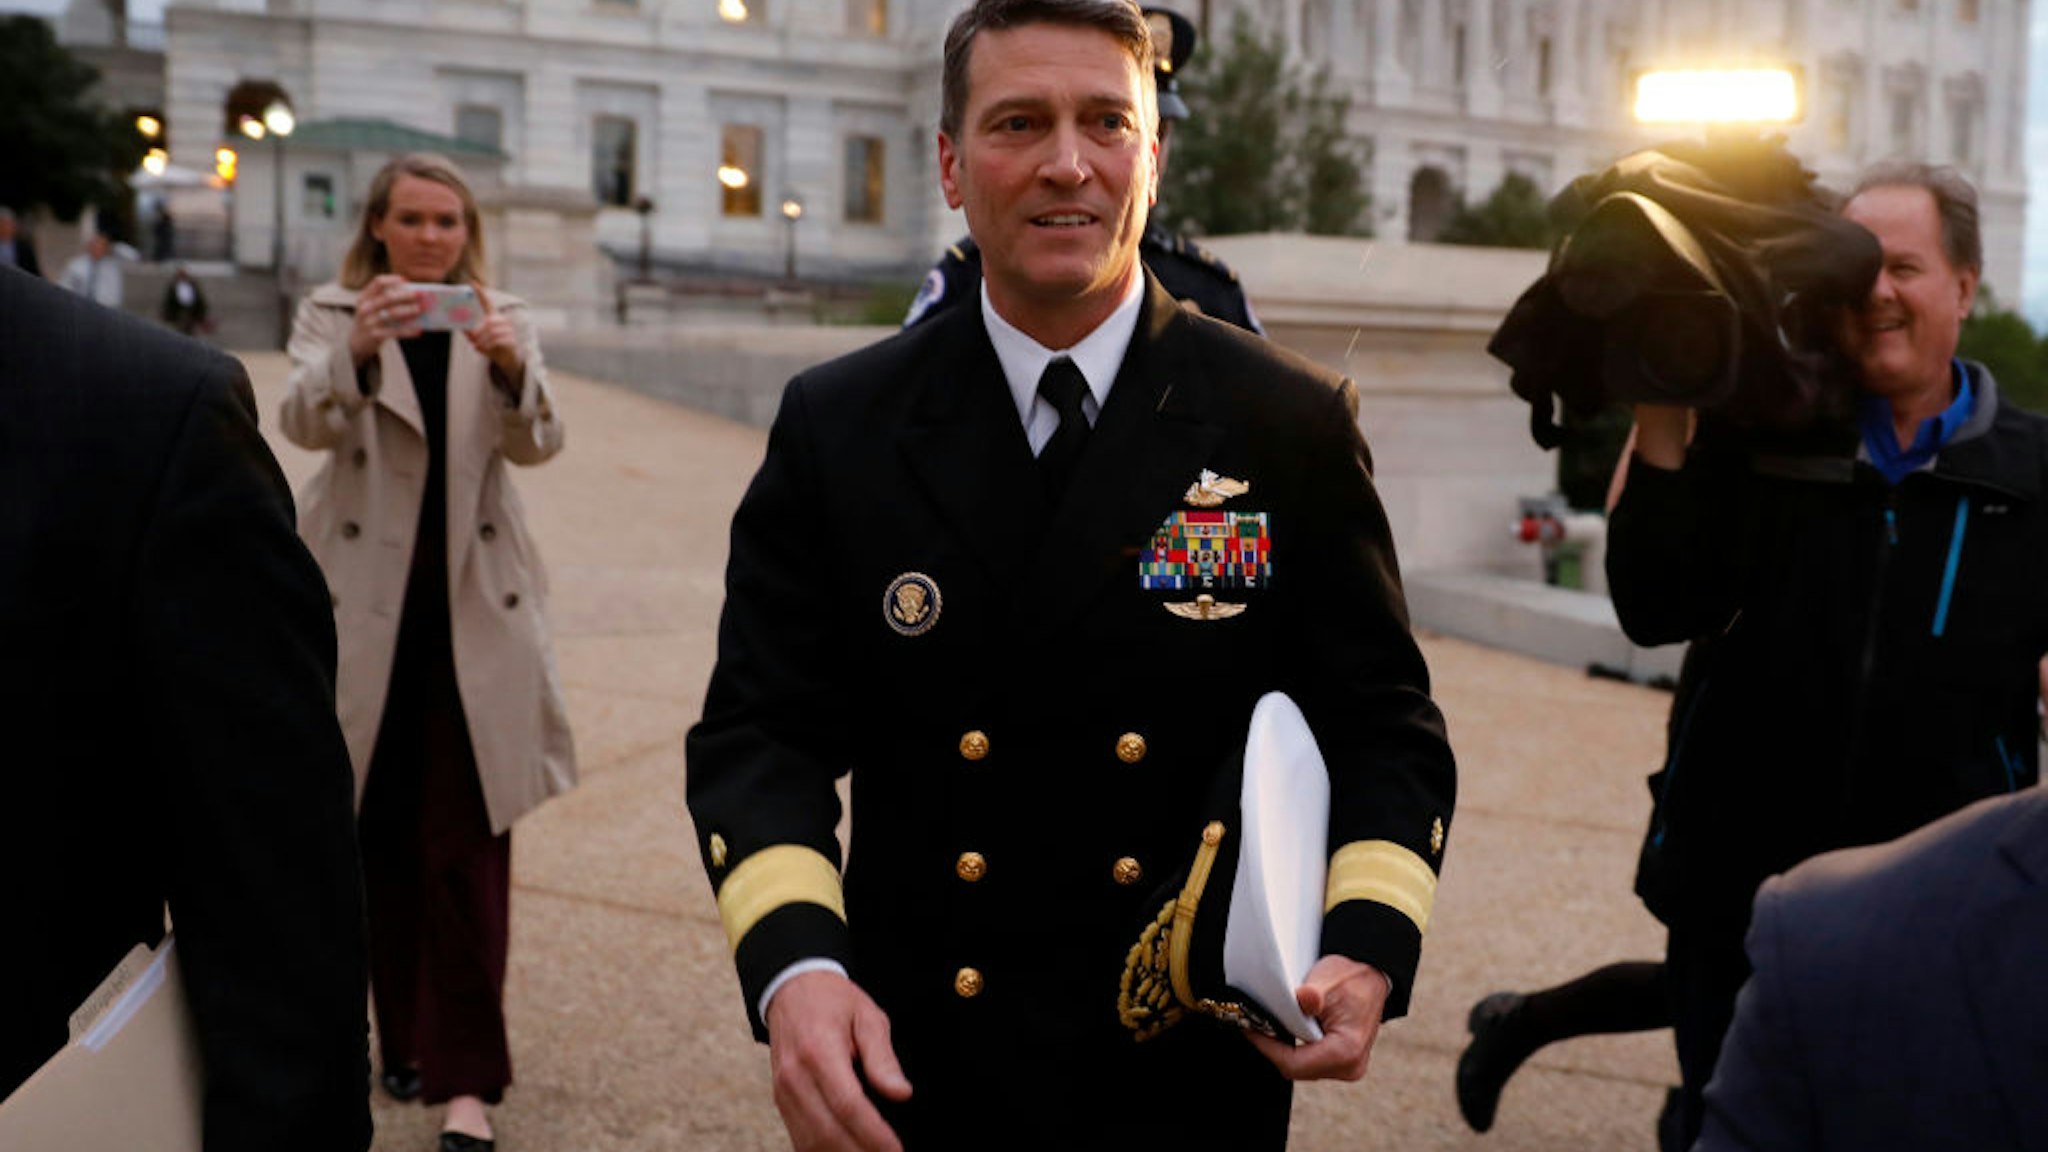 Veterans Affairs Secretary Nominee Dr. Ronny Jackson departs the U.S. Capitol April 25, 2018 in Washington, DC. Jackson faces a tough confirmation fight after being plagued by allegations of inappropriate behavior.